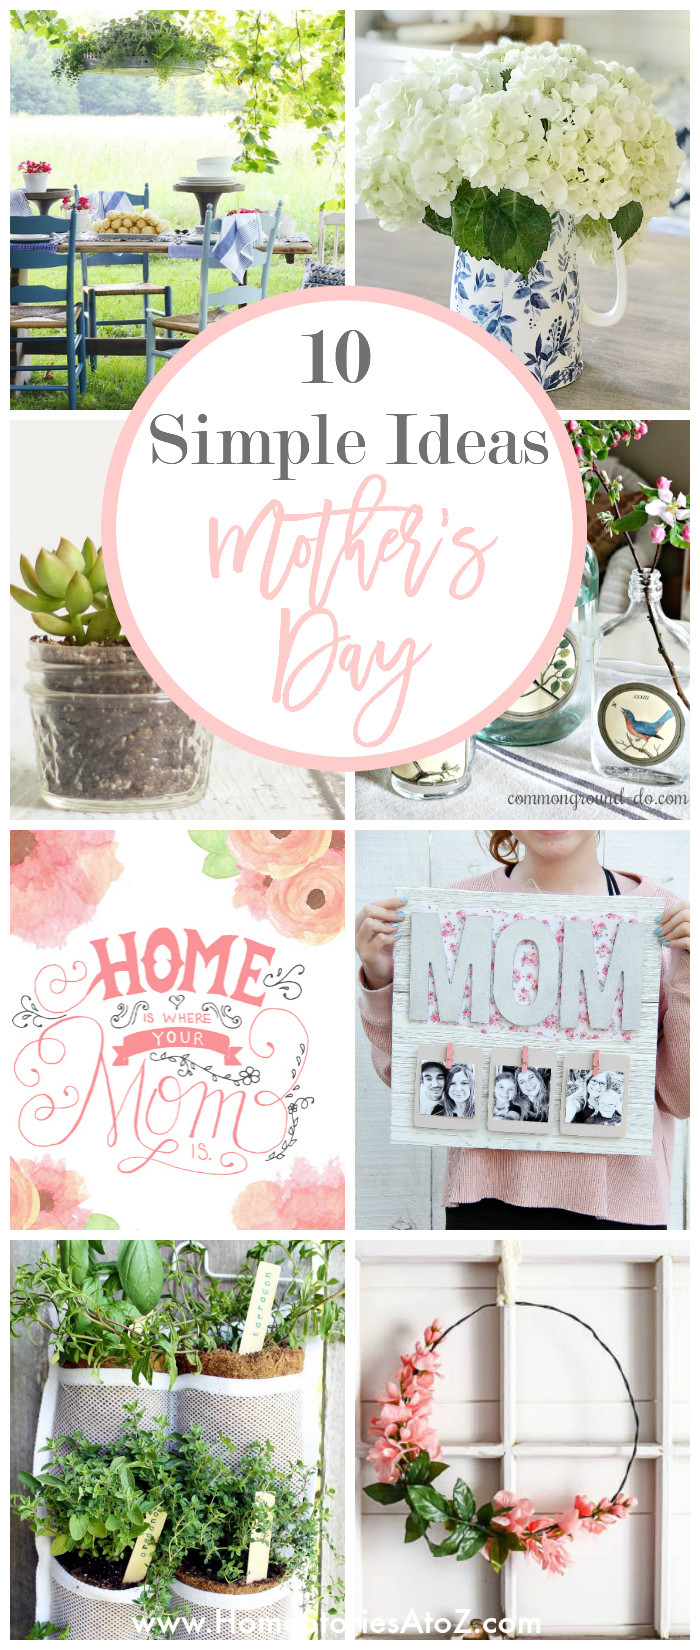 Easy Diy Mother's Day Gifts
 10 Easy DIY Mother’s Day Gift Ideas